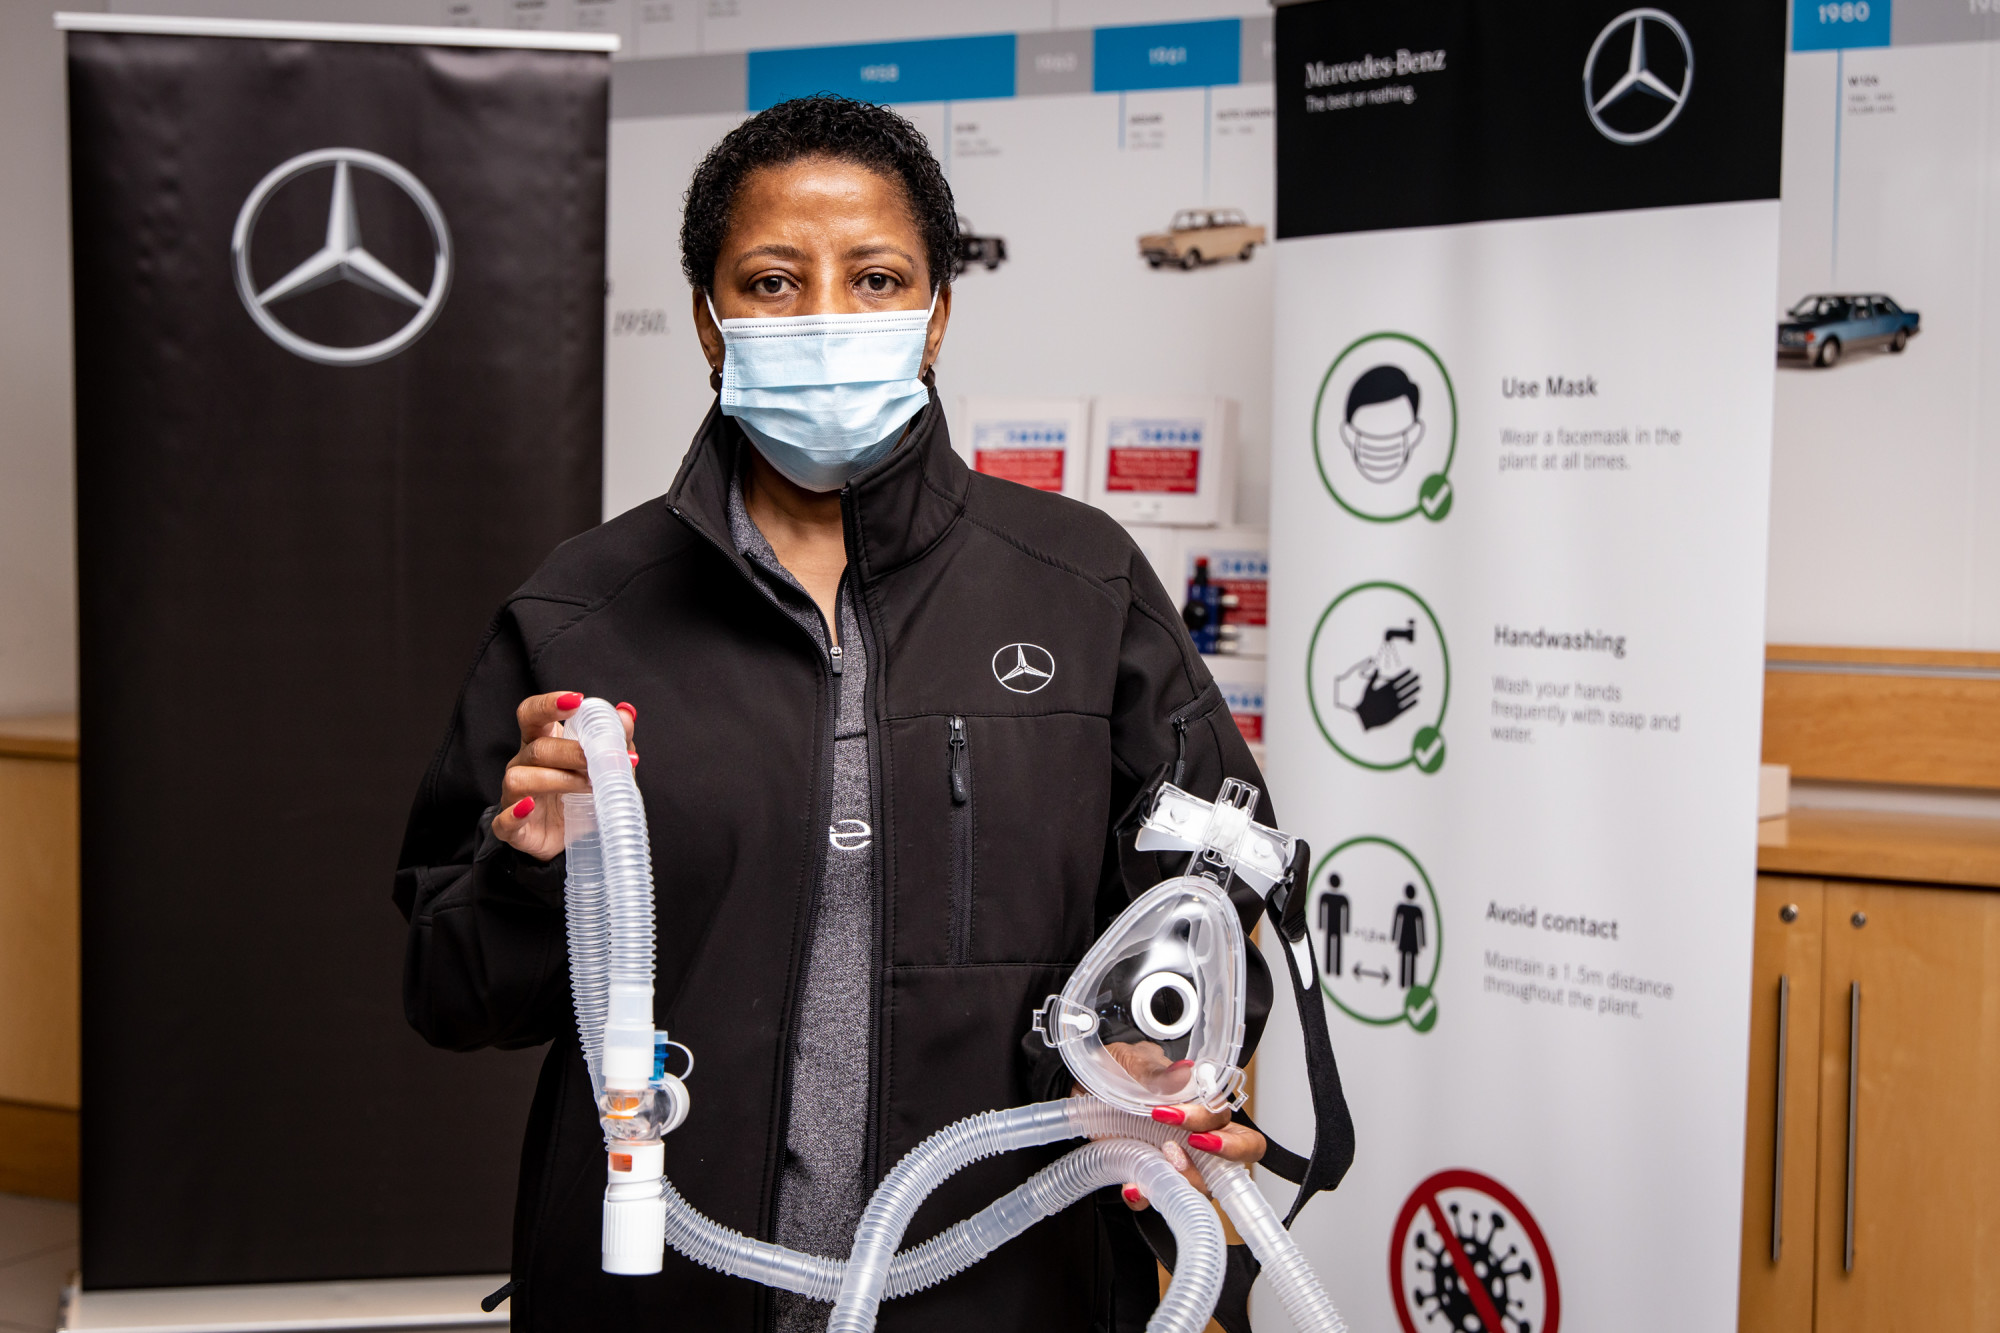 Mercedes-Benz donates CPAP devices to public hospitals in South Africa